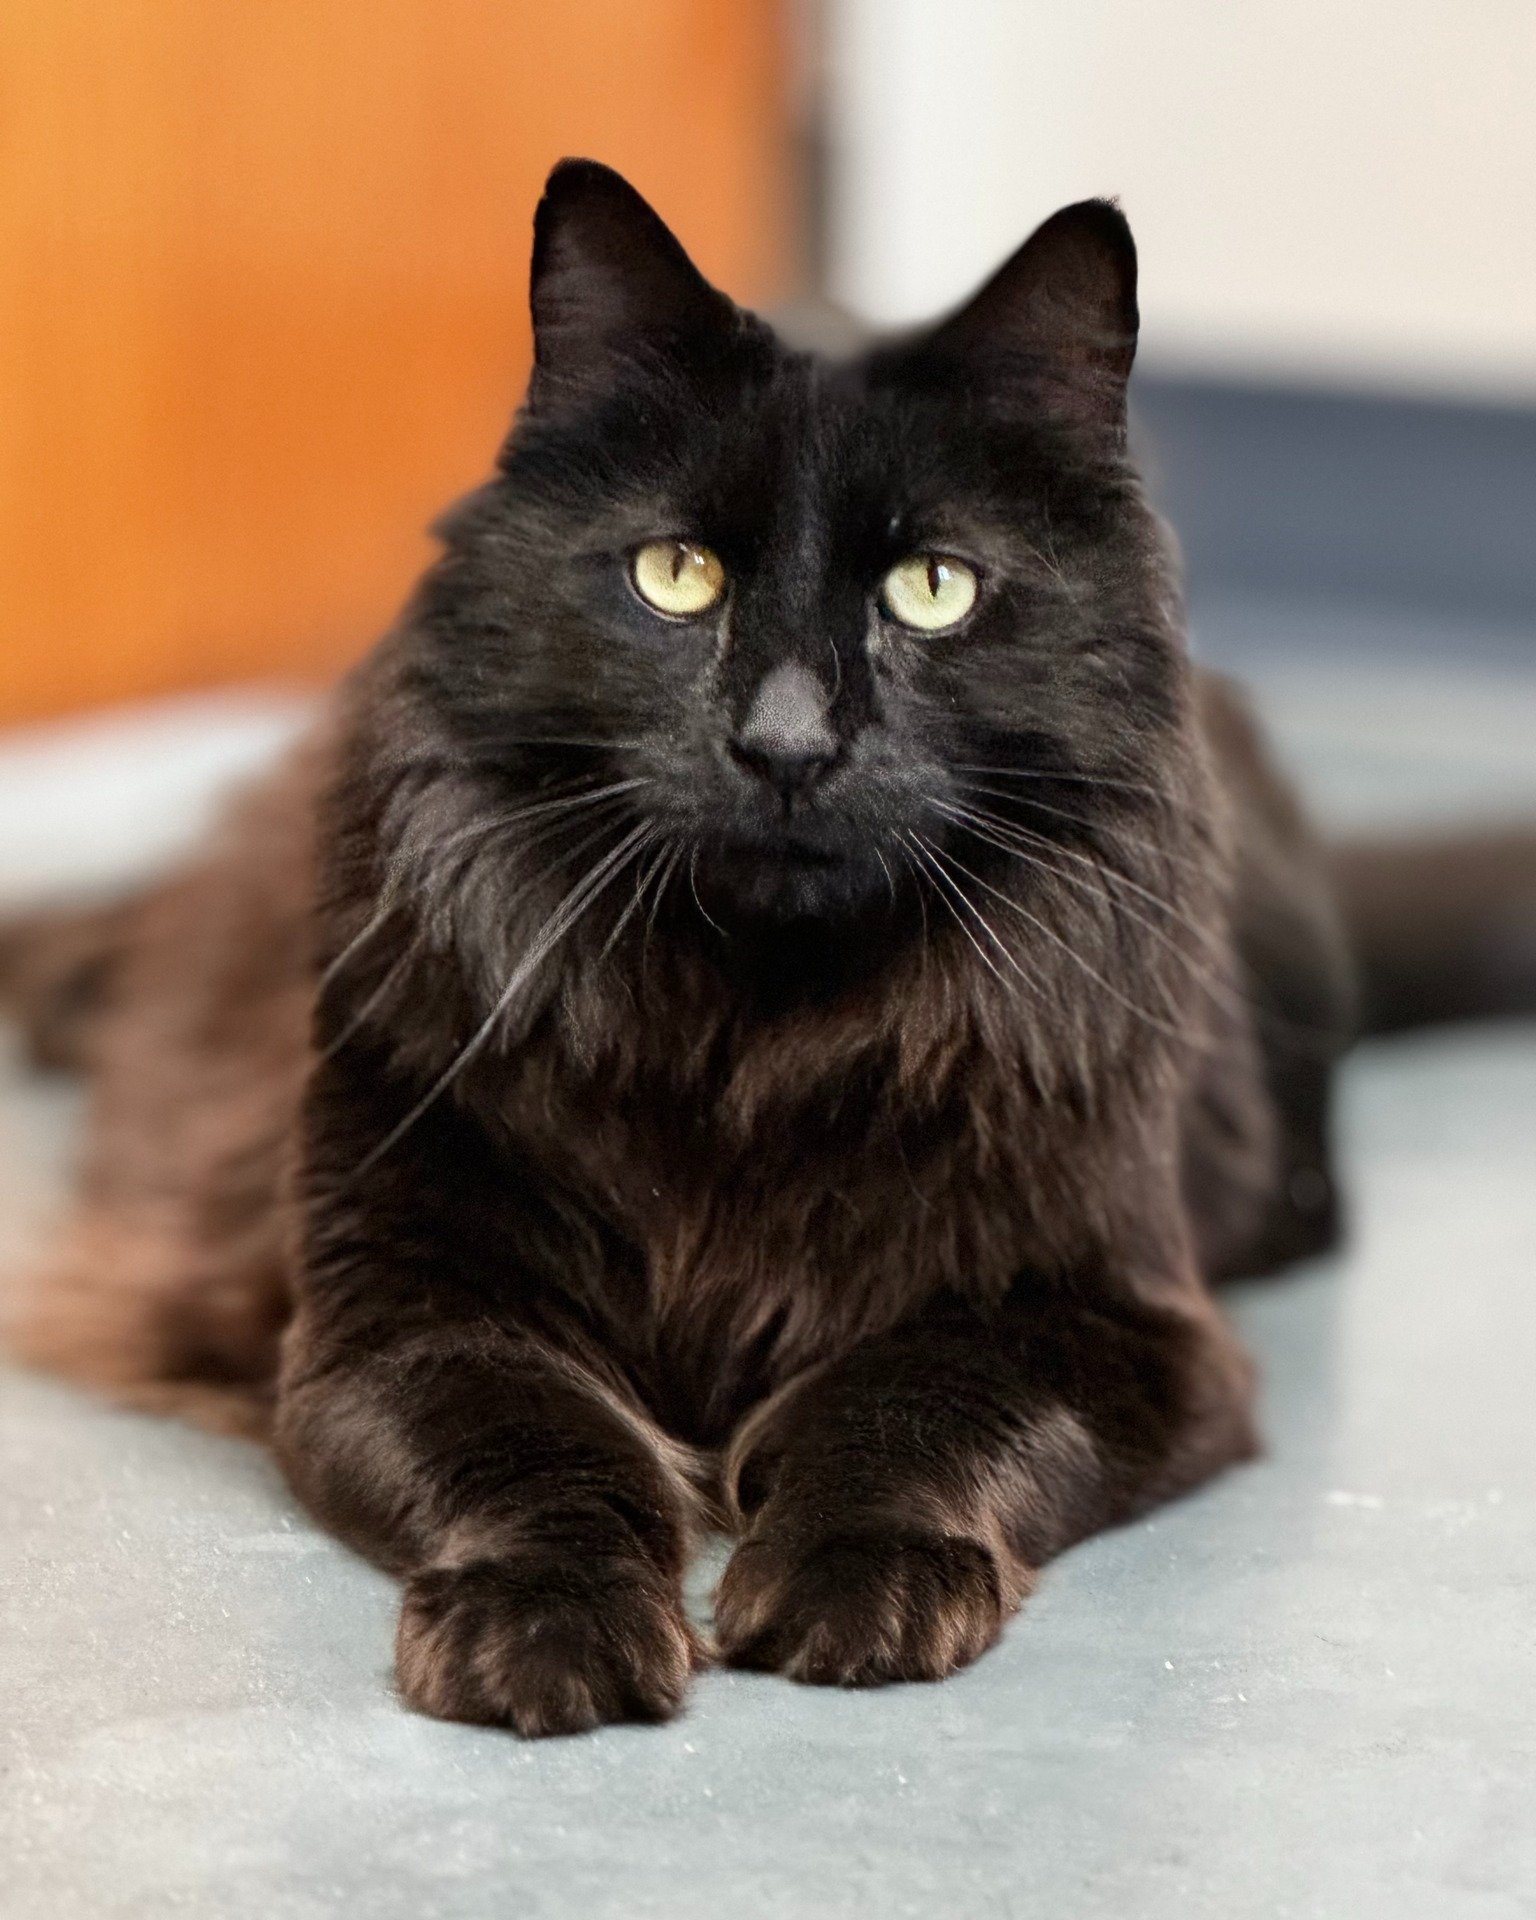 Meet Panther! Panther is an 8-year-old male Domestic Longhair cat with a sleek black coat, here at Blue Mountain Humane Society in Catropolis, awaiting his forever home for more than two months. 

He may seem shy at first, but with patience and under